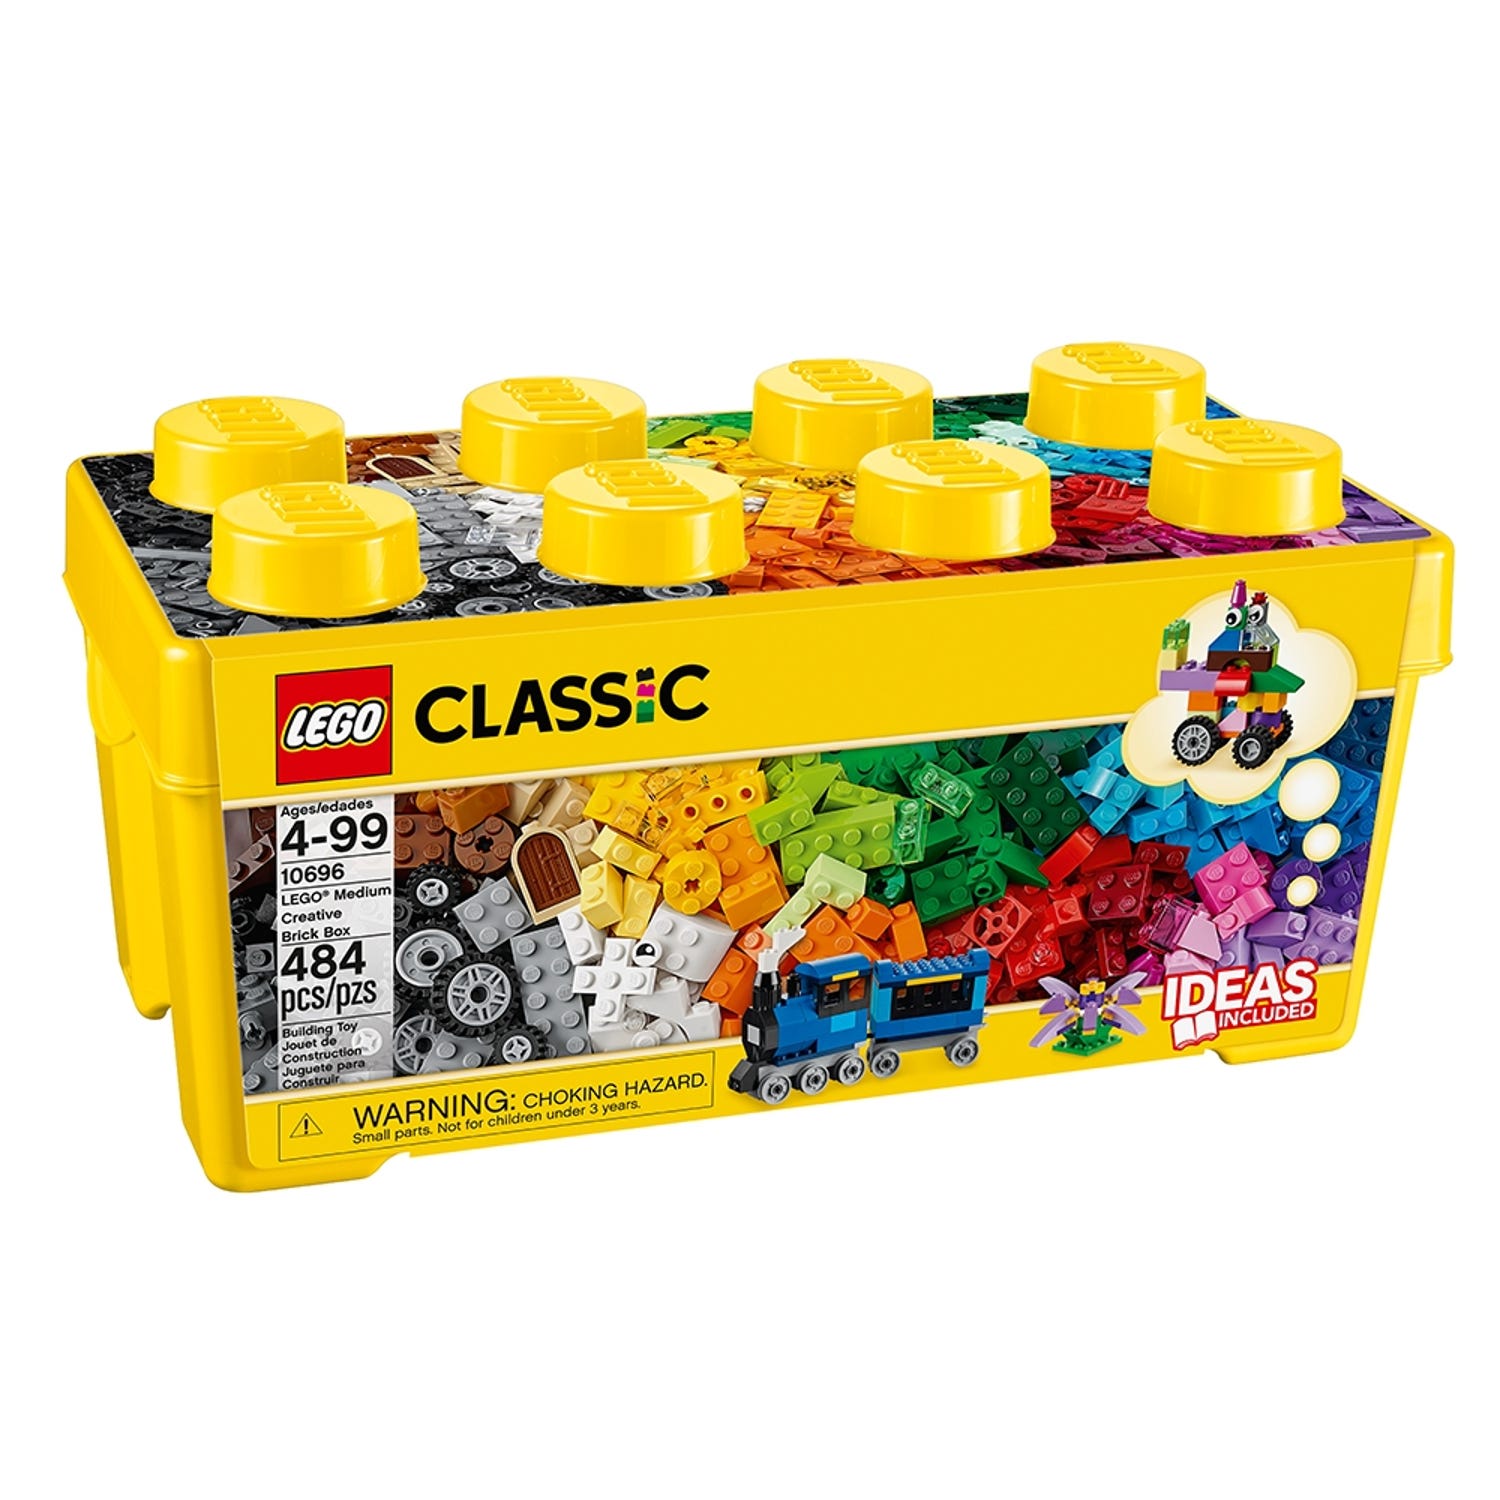 LEGO® Creative Brick Box 10696 | Classic | Buy online at the Official LEGO® US